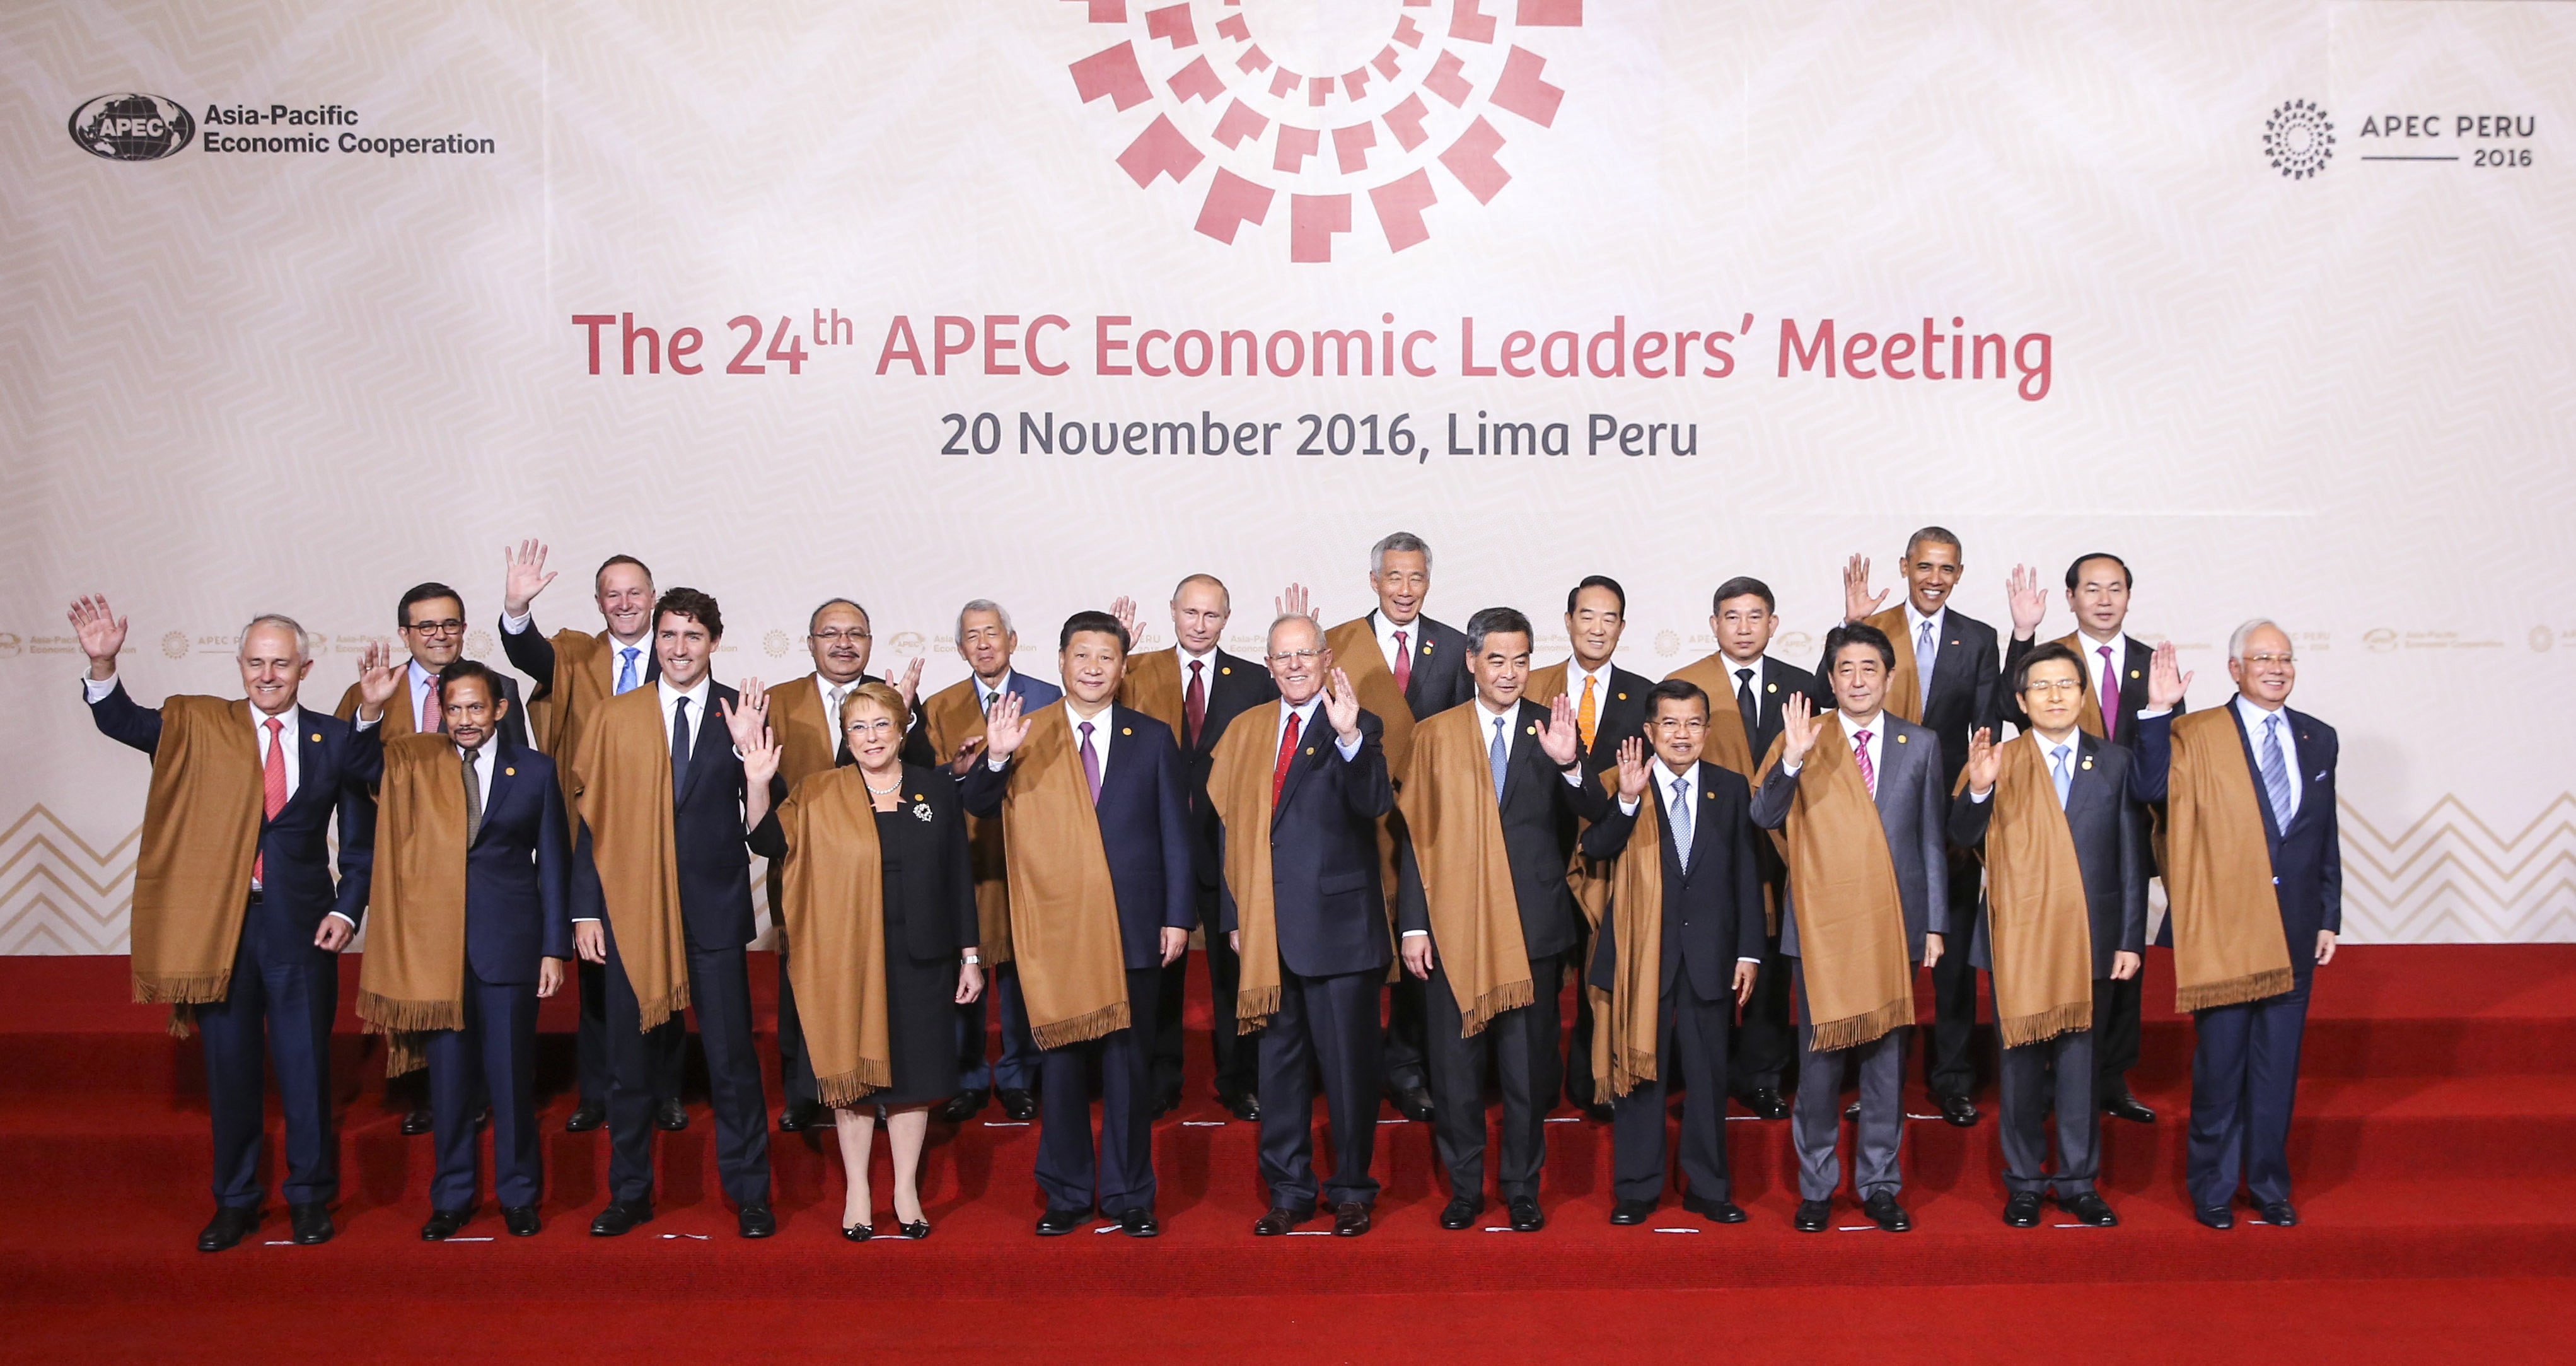 Chinese President Xi Jinping (5th L F) poses for a group photo with other participants of the 24th APEC Economic Leaders' Meeting in Lima, Peru, Nov. 20, 2016.